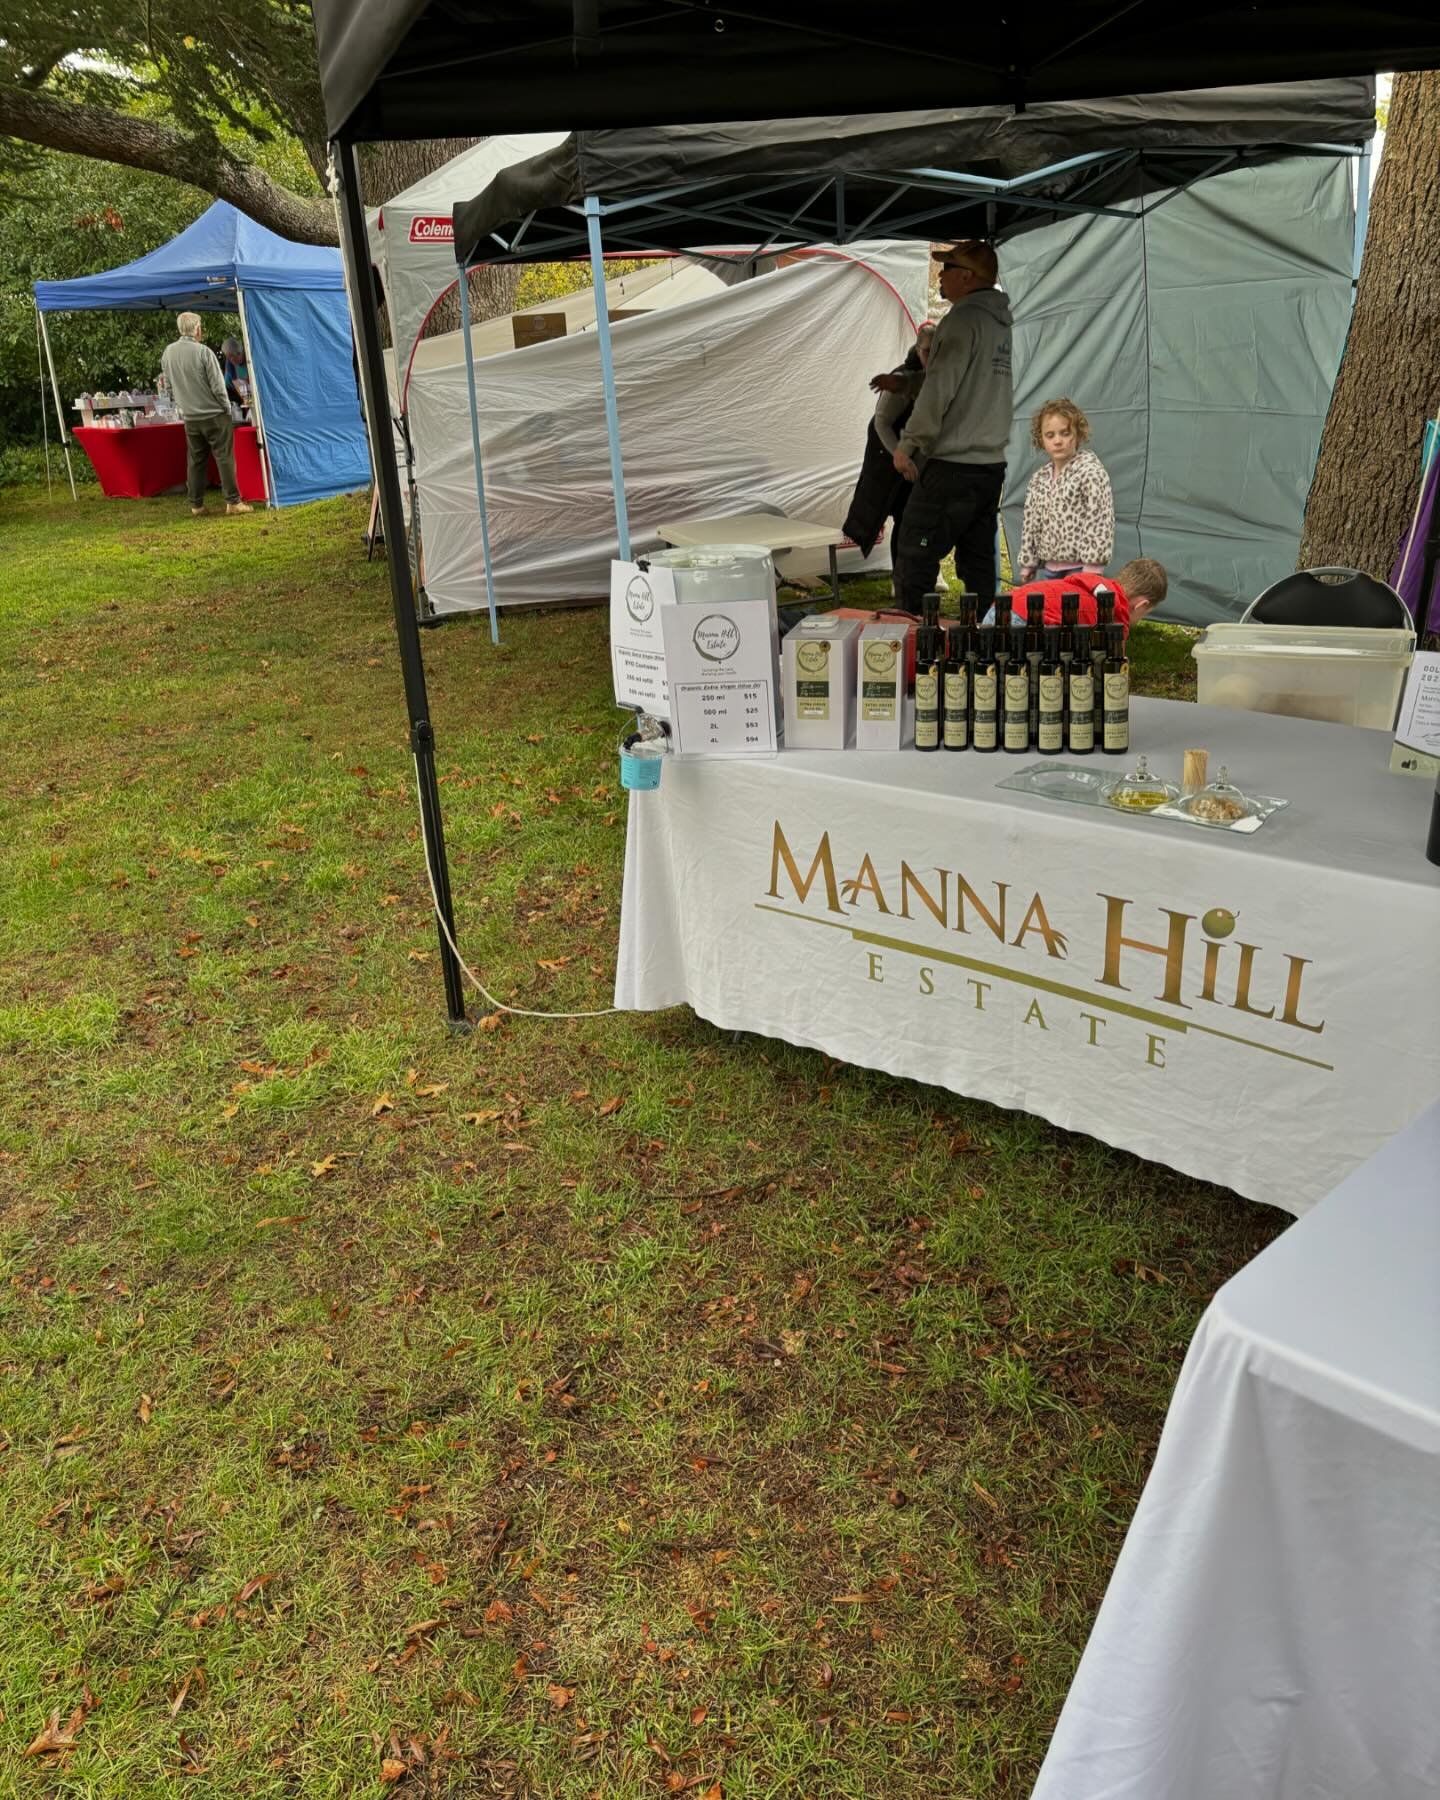 Ballan farmers market on this morning. Come on down and sample some of our award winning biodynamic-organic extra virgin olive oil, soaps and balms. #mannahillestate #extravirginoliveoil #extravirgin #farmarsmarket #ballanfarmersmarket #ballanfarmers